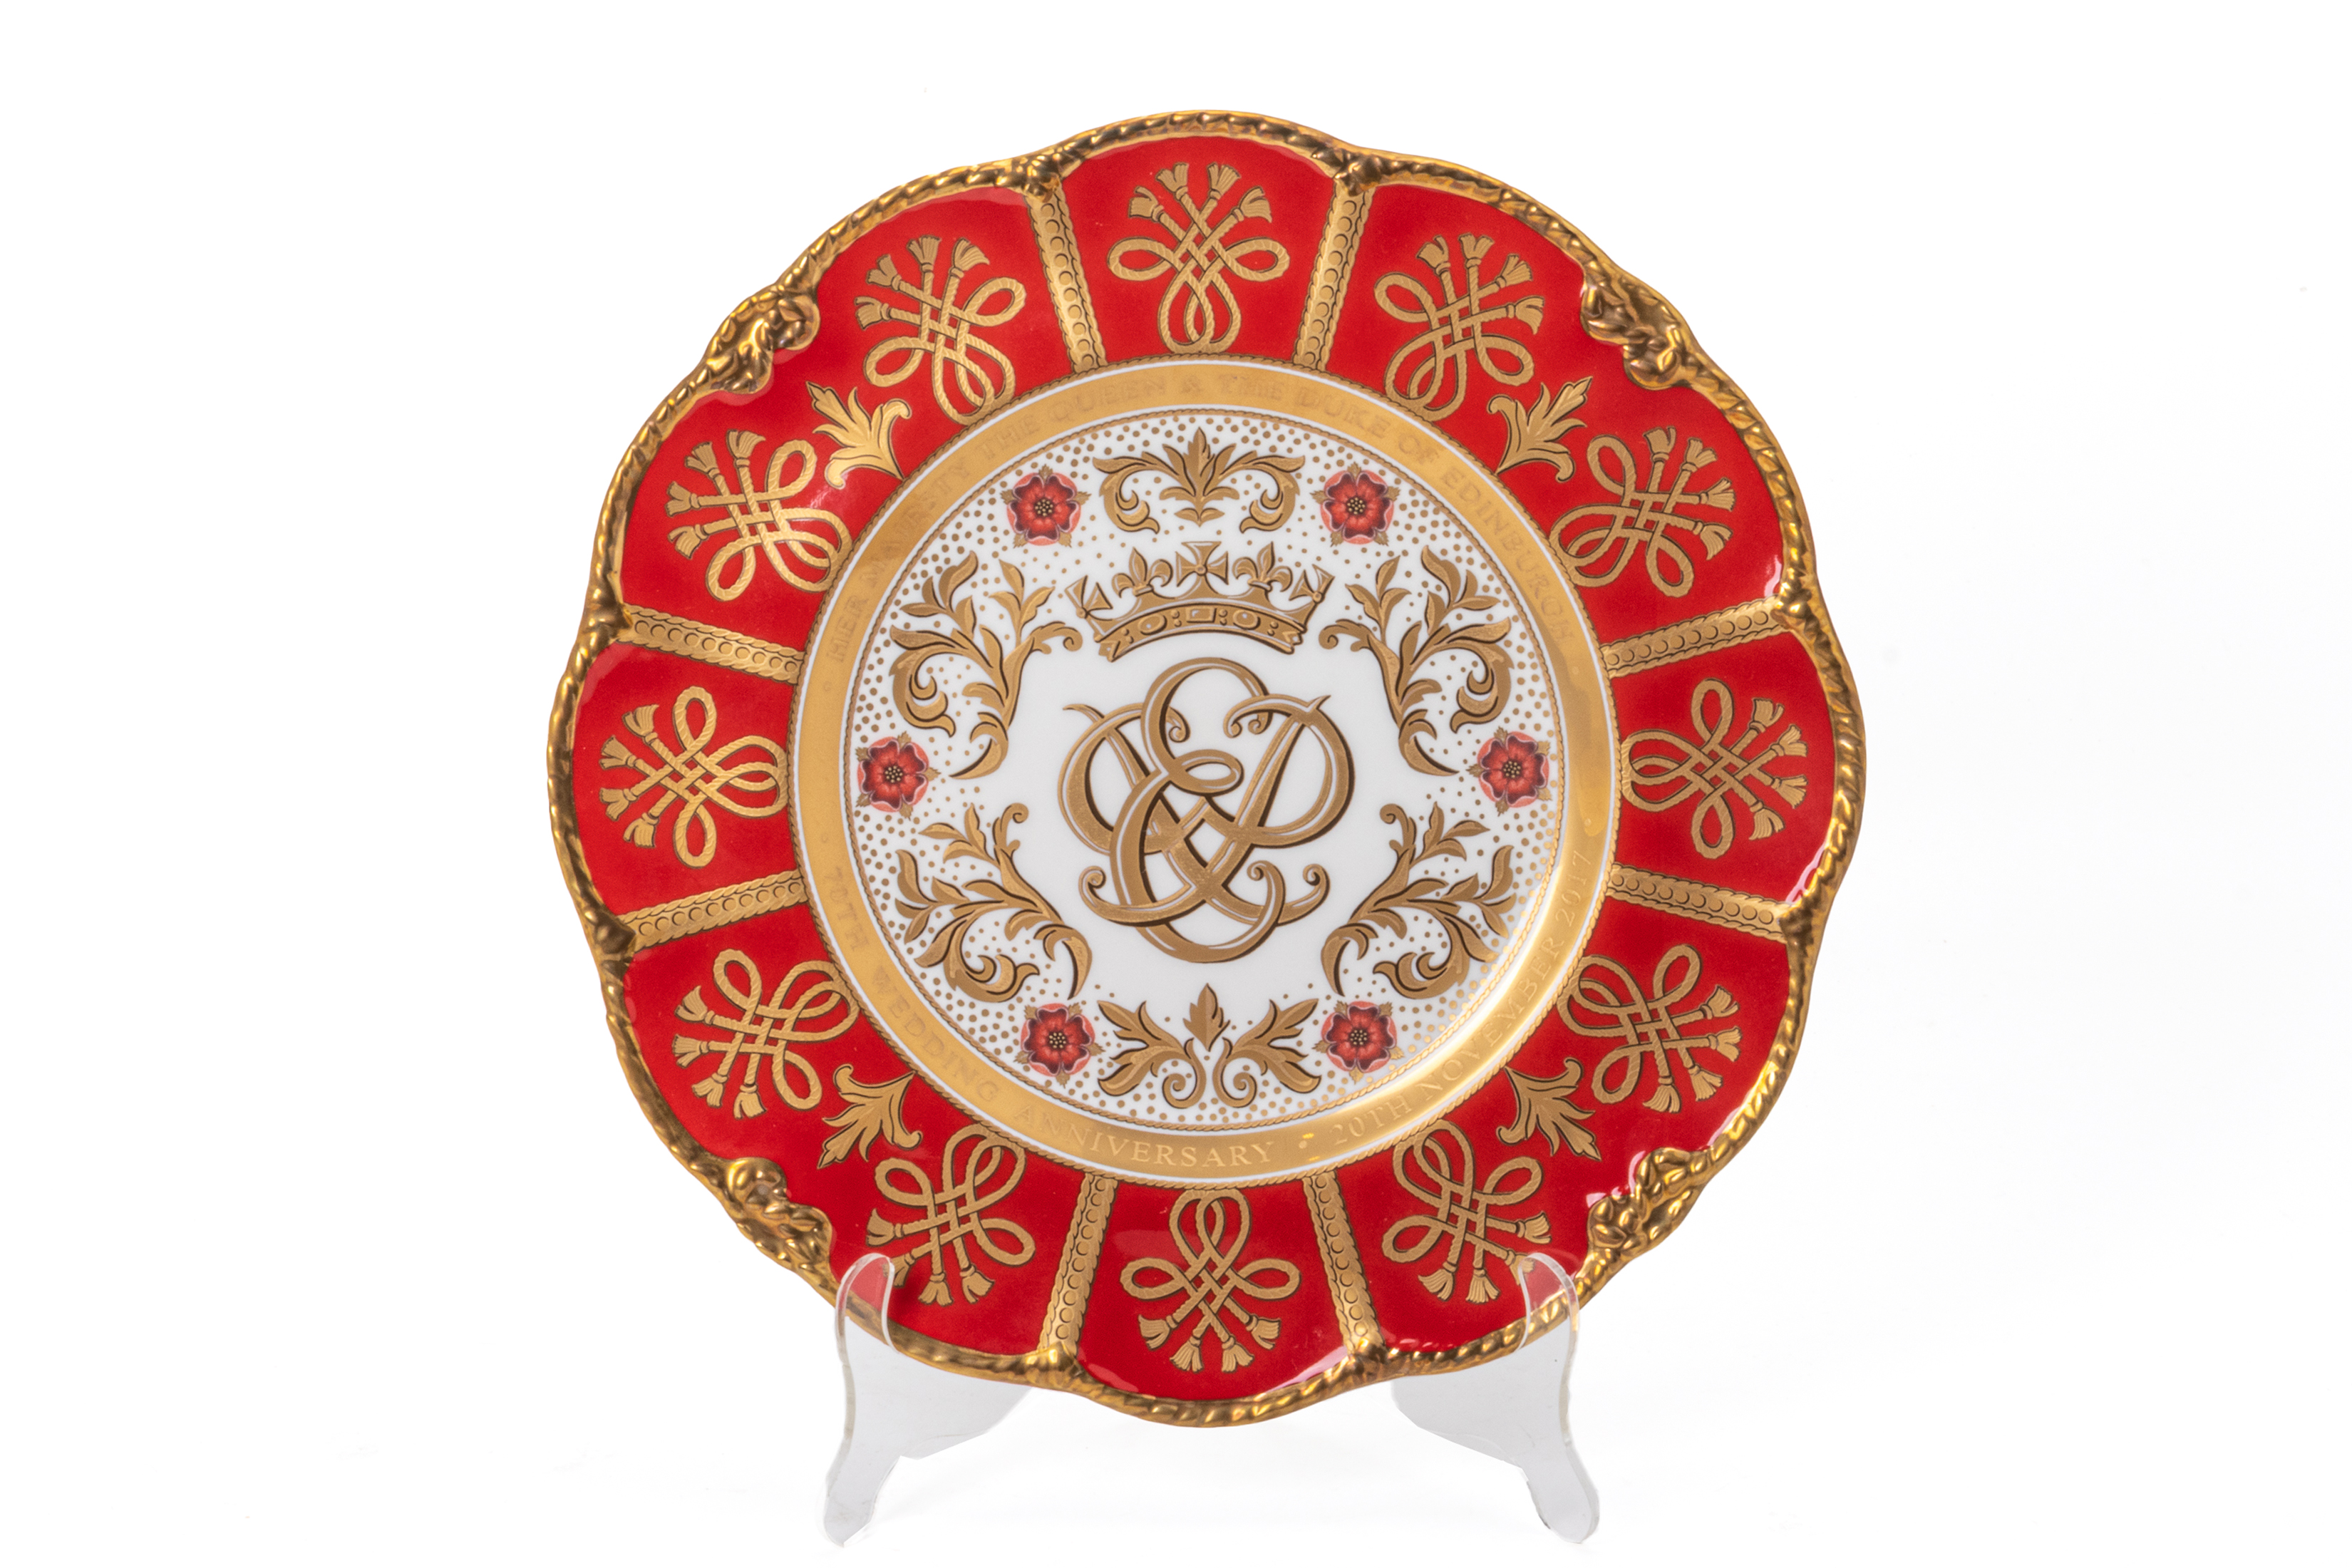 A QUEEN ELIZABETH II AND PRINCE PHILIP COMMEMORATIVE PLATE - Image 3 of 5